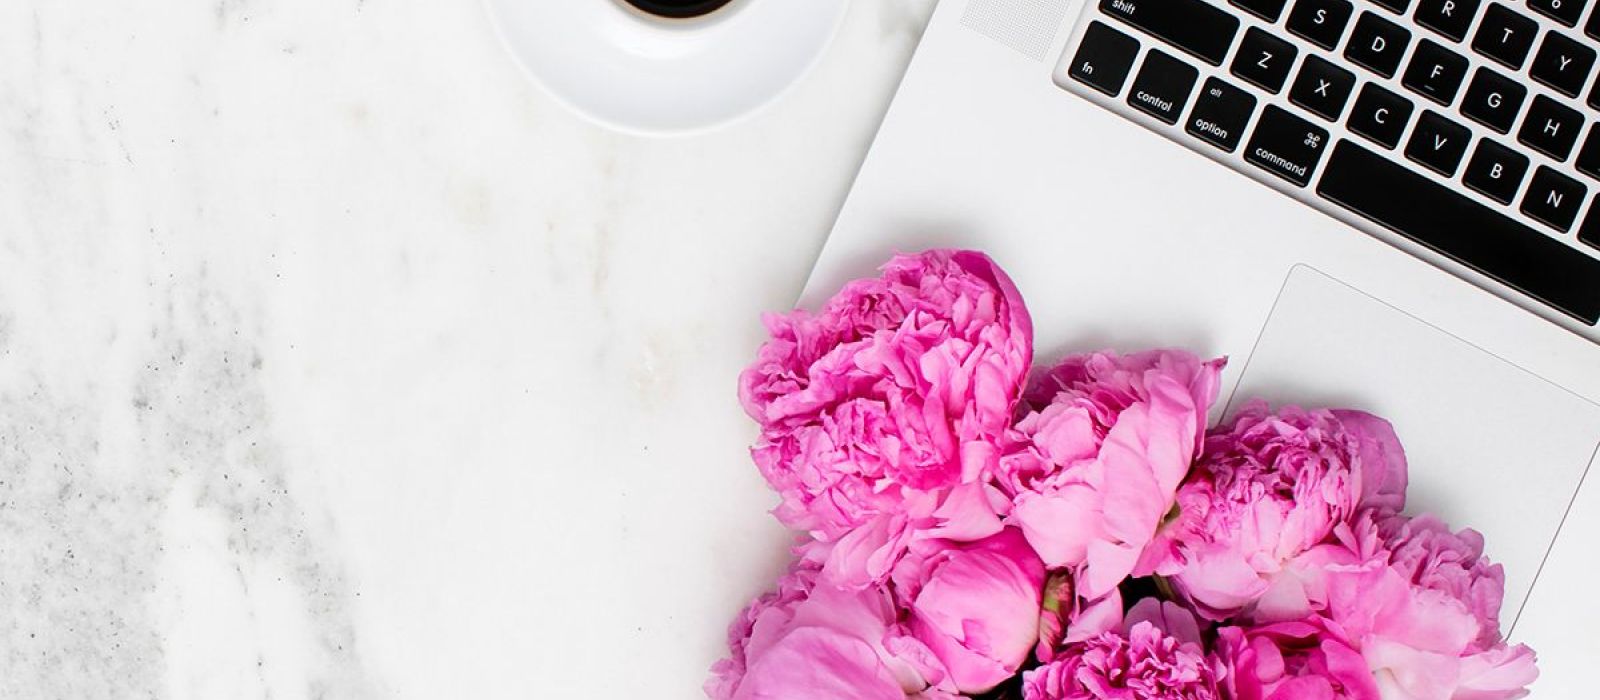 coffee and computer on marble desk with pink flowers